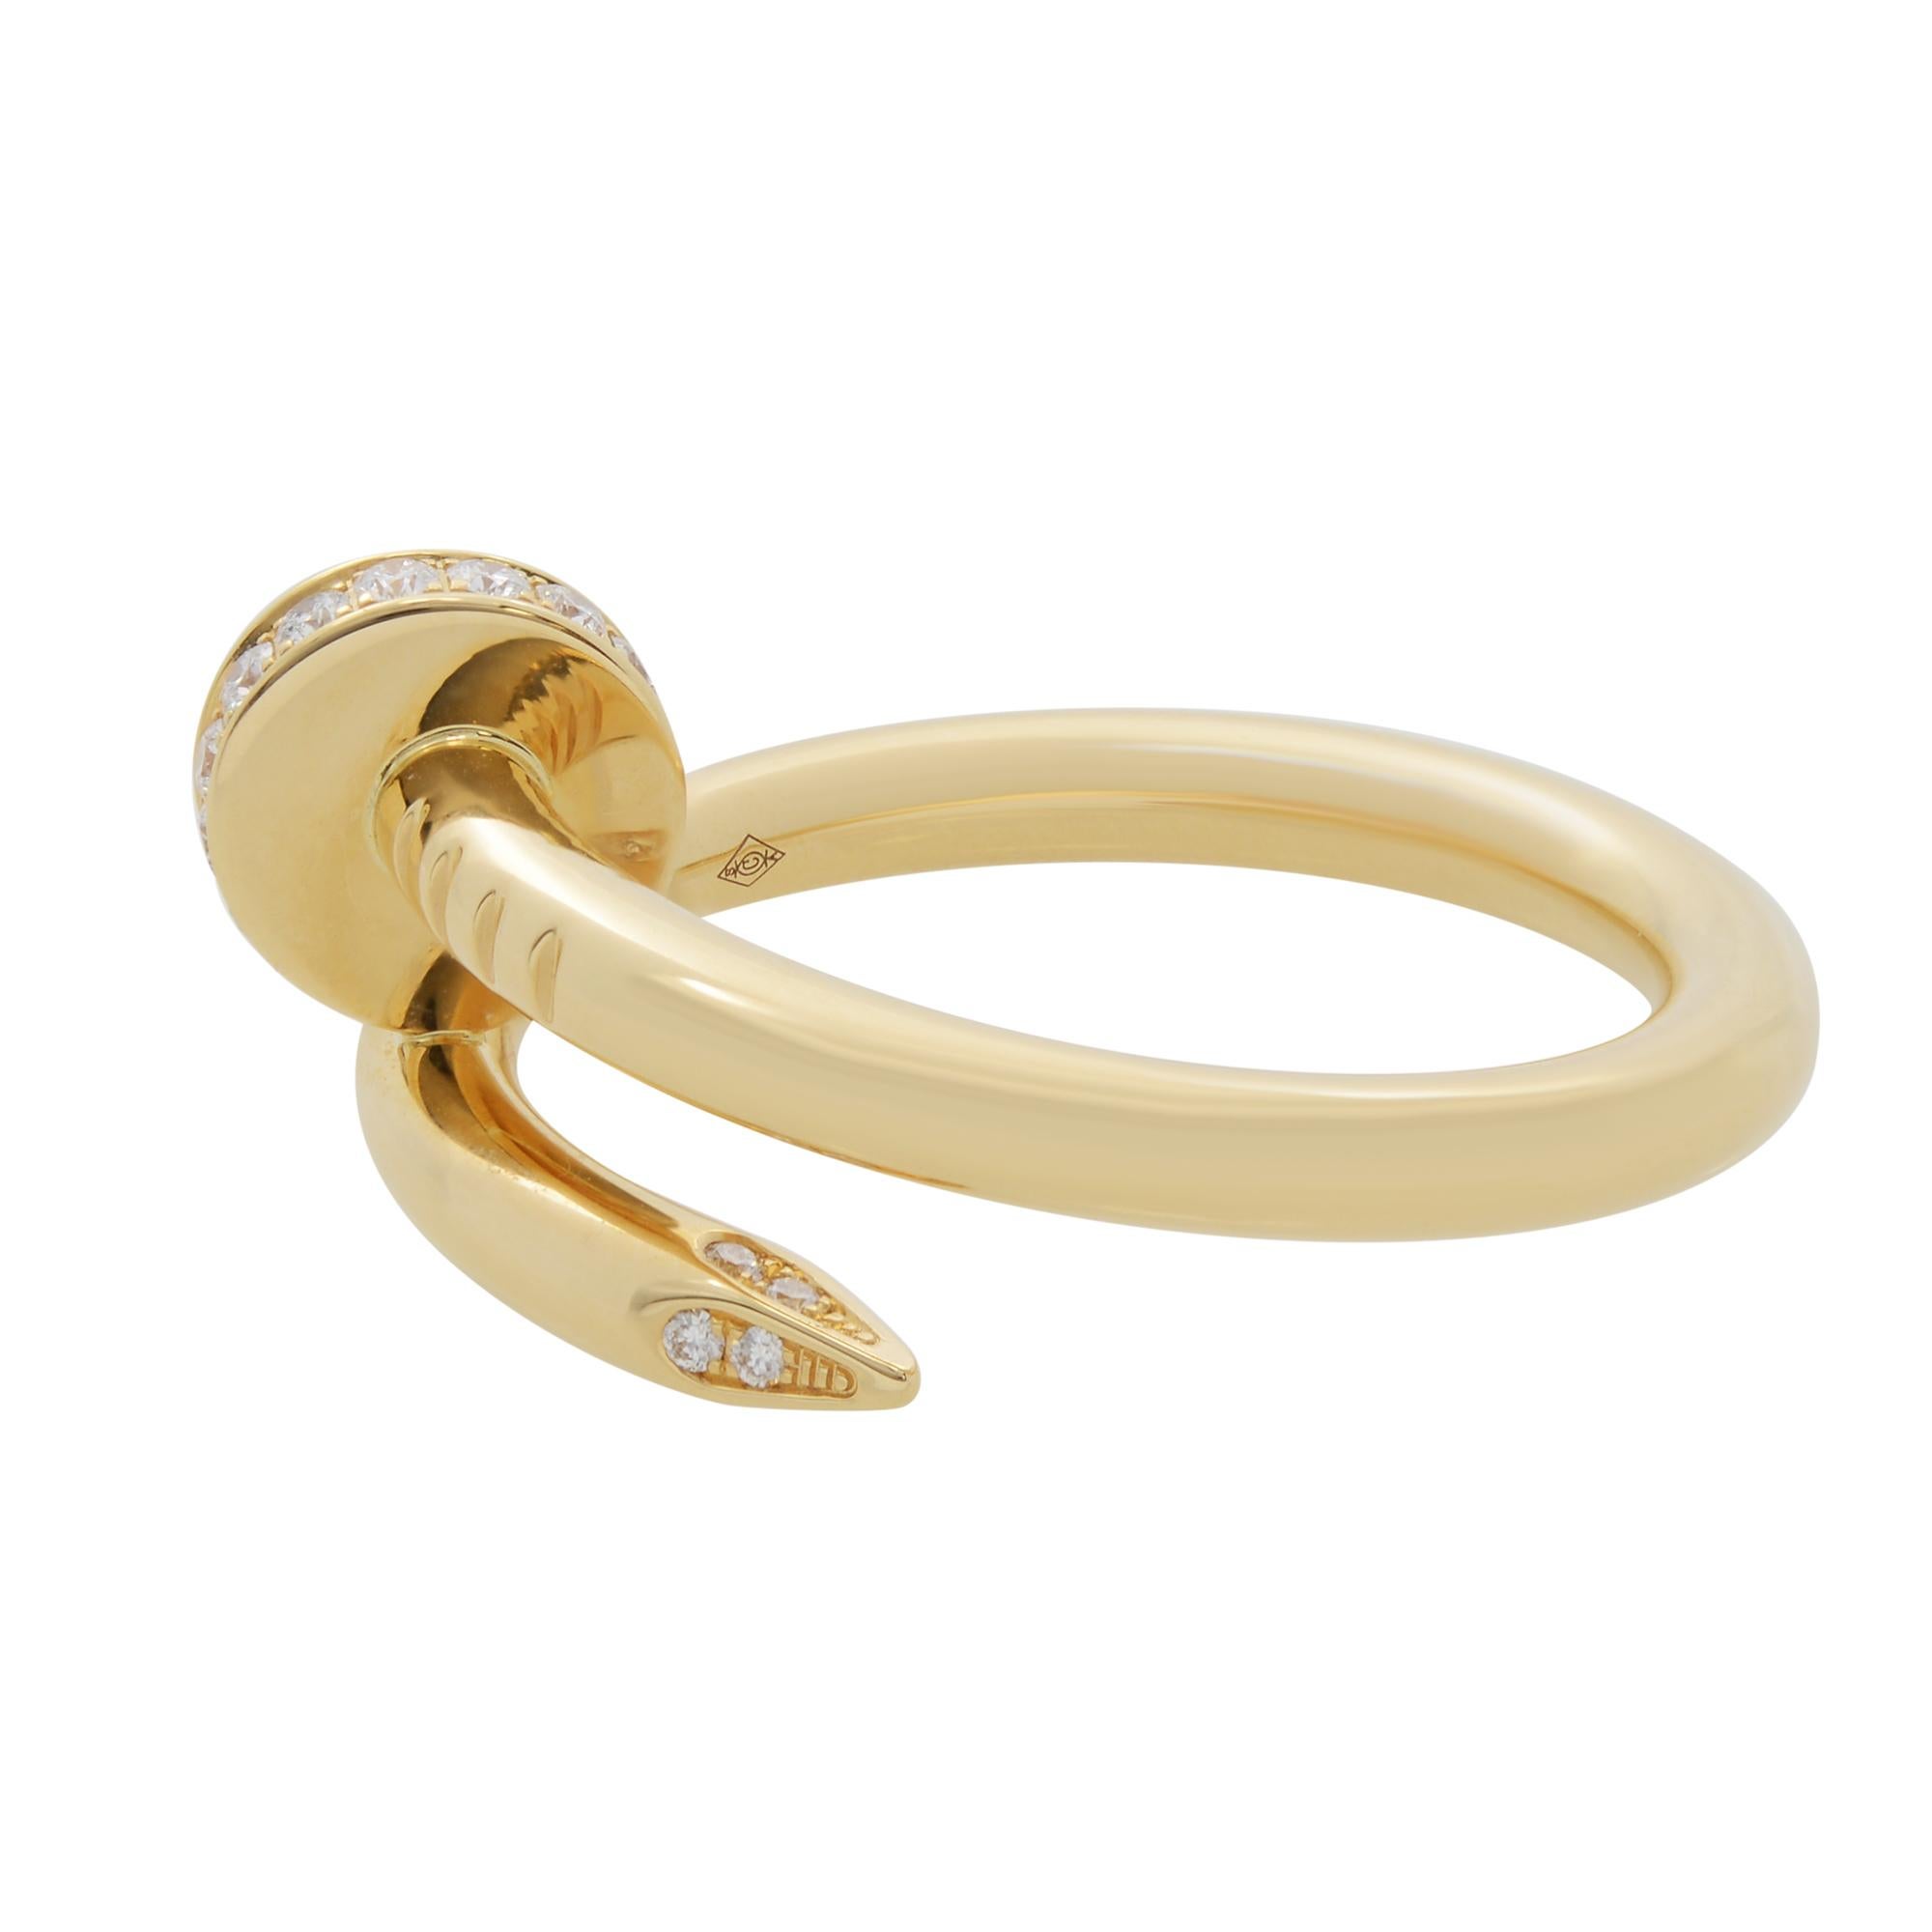 Cartier Juste un Clou ring in 18K yellow gold. Set with 22 brilliant cut diamonds totaling 0.13 carats. Width: 2.65mm. Ring size 54 US 7. Excellent pre-owned condition. Looks unworn. Comes with original box and papers. 